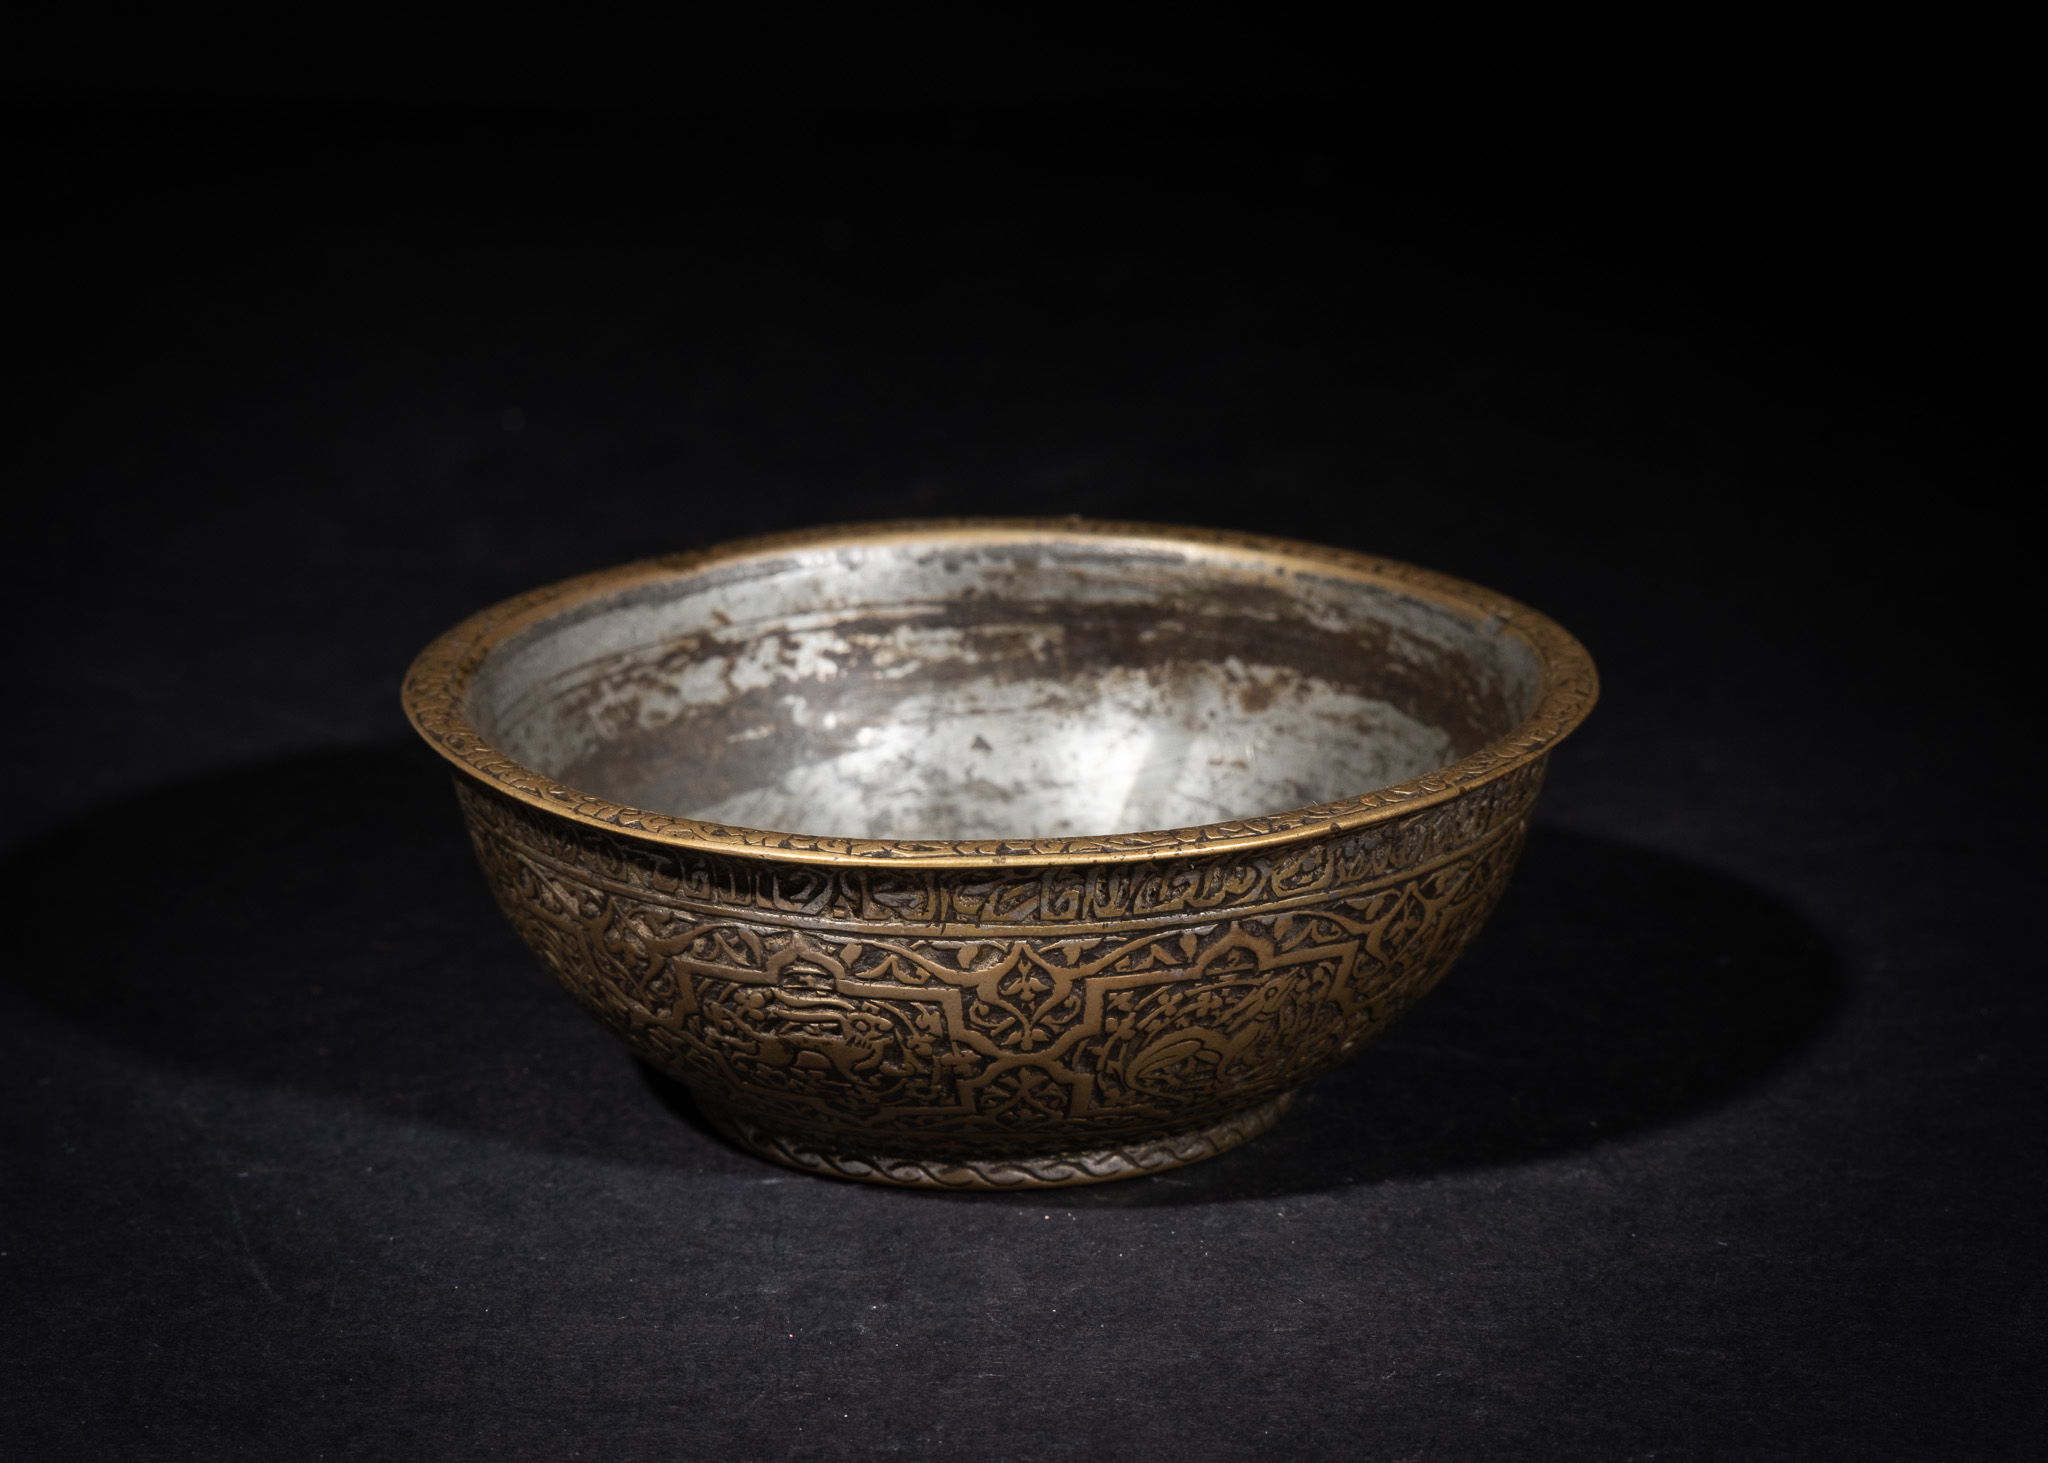 AN INSCRIBED SAFAVID TINNED COPPER BOWL, SIGNED MOHAMMAD SOLTANI, 17TH CENTURY